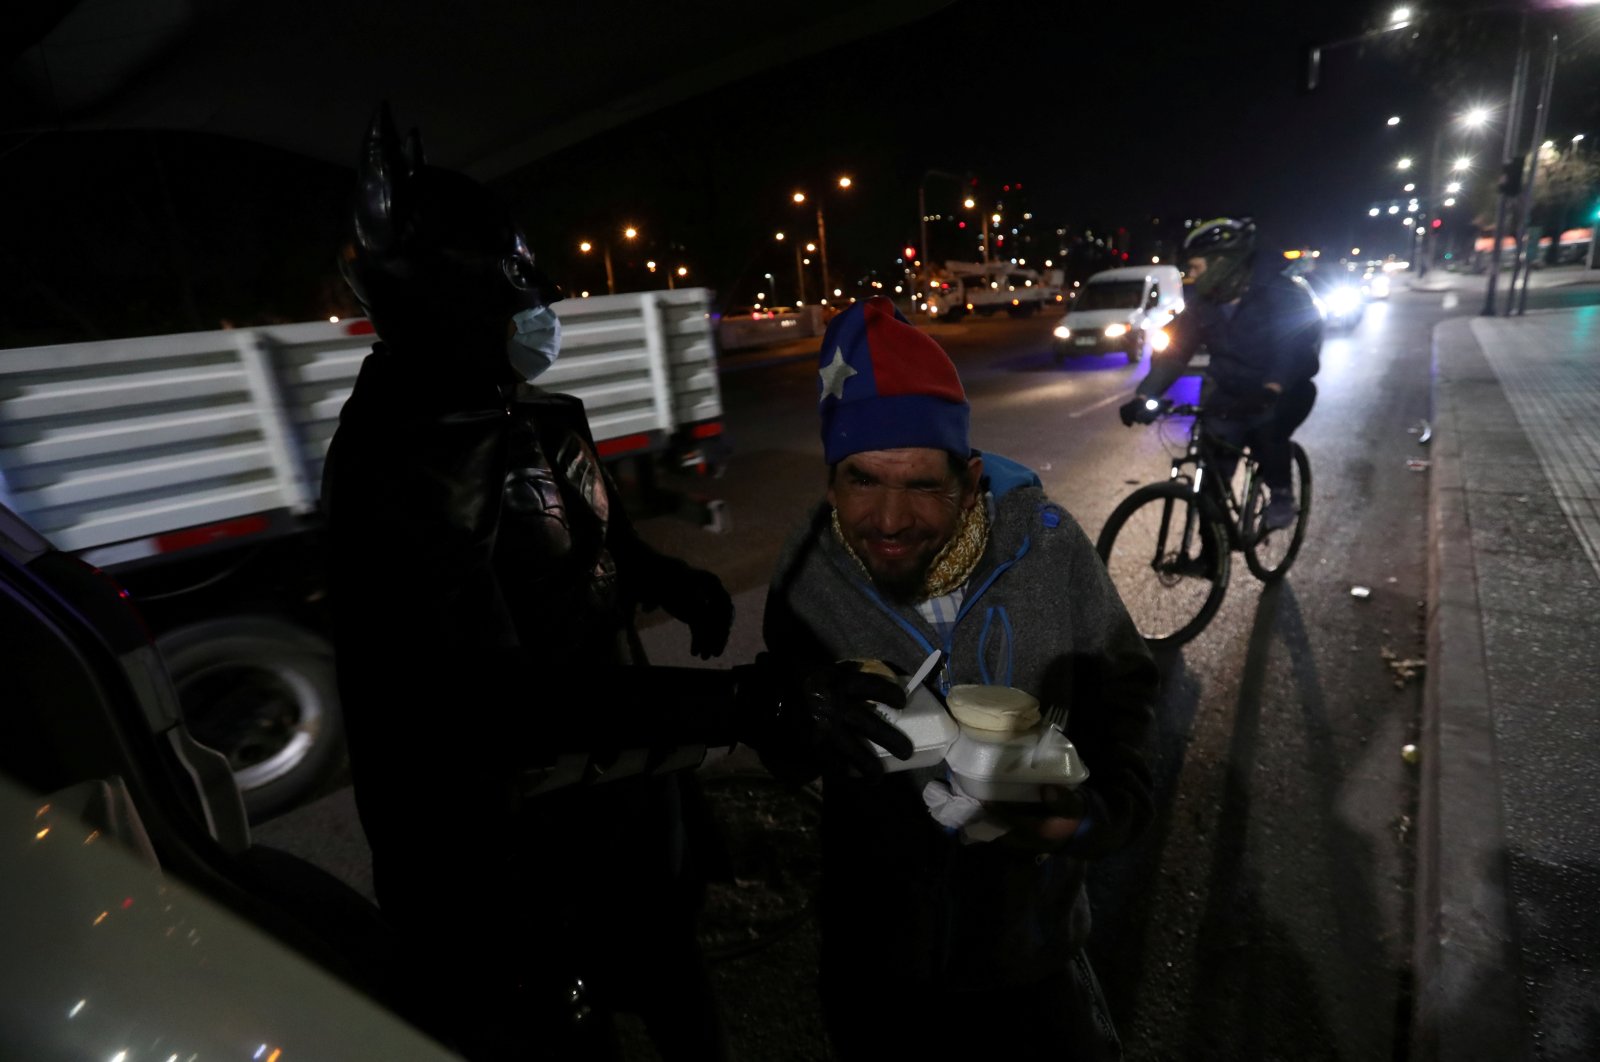 A homeless man gestures next to Chilean trader and so-called "Batman solidario" (Solidarity Batman), as he gives out charity food rations in the street, during the global outbreak of the coronavirus in Santiago, Chile, Aug. 12, 2020. (Reuters Photo)